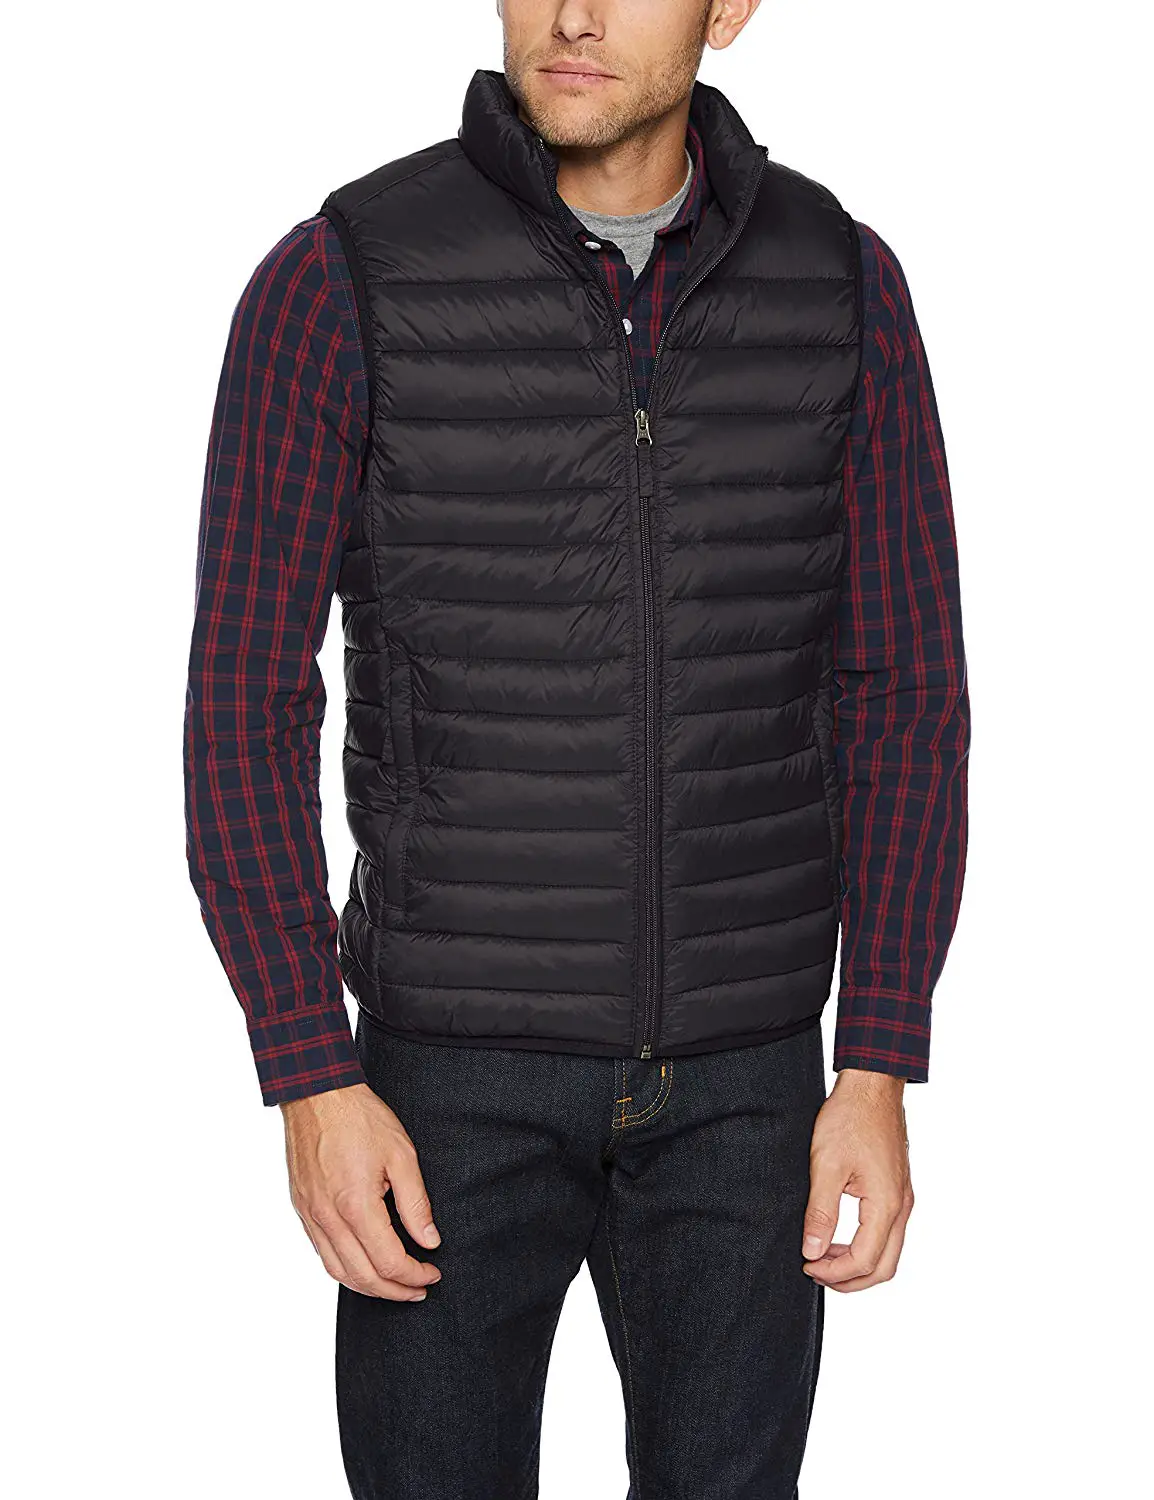 Best Winter Golf Vests Reviewed - That's A Gimmie